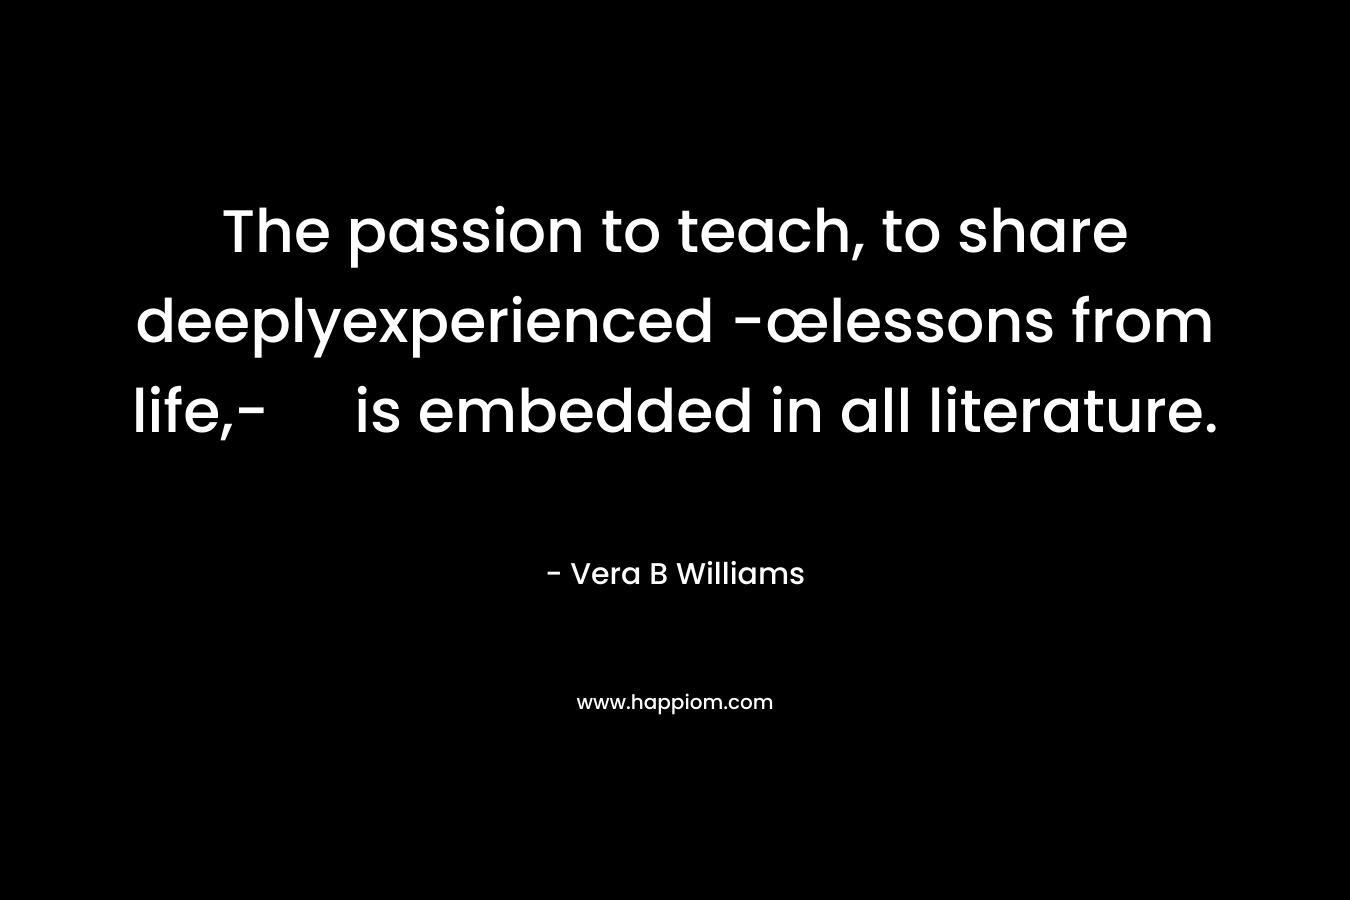 The passion to teach, to share deeplyexperienced -œlessons from life,- is embedded in all literature. – Vera B Williams